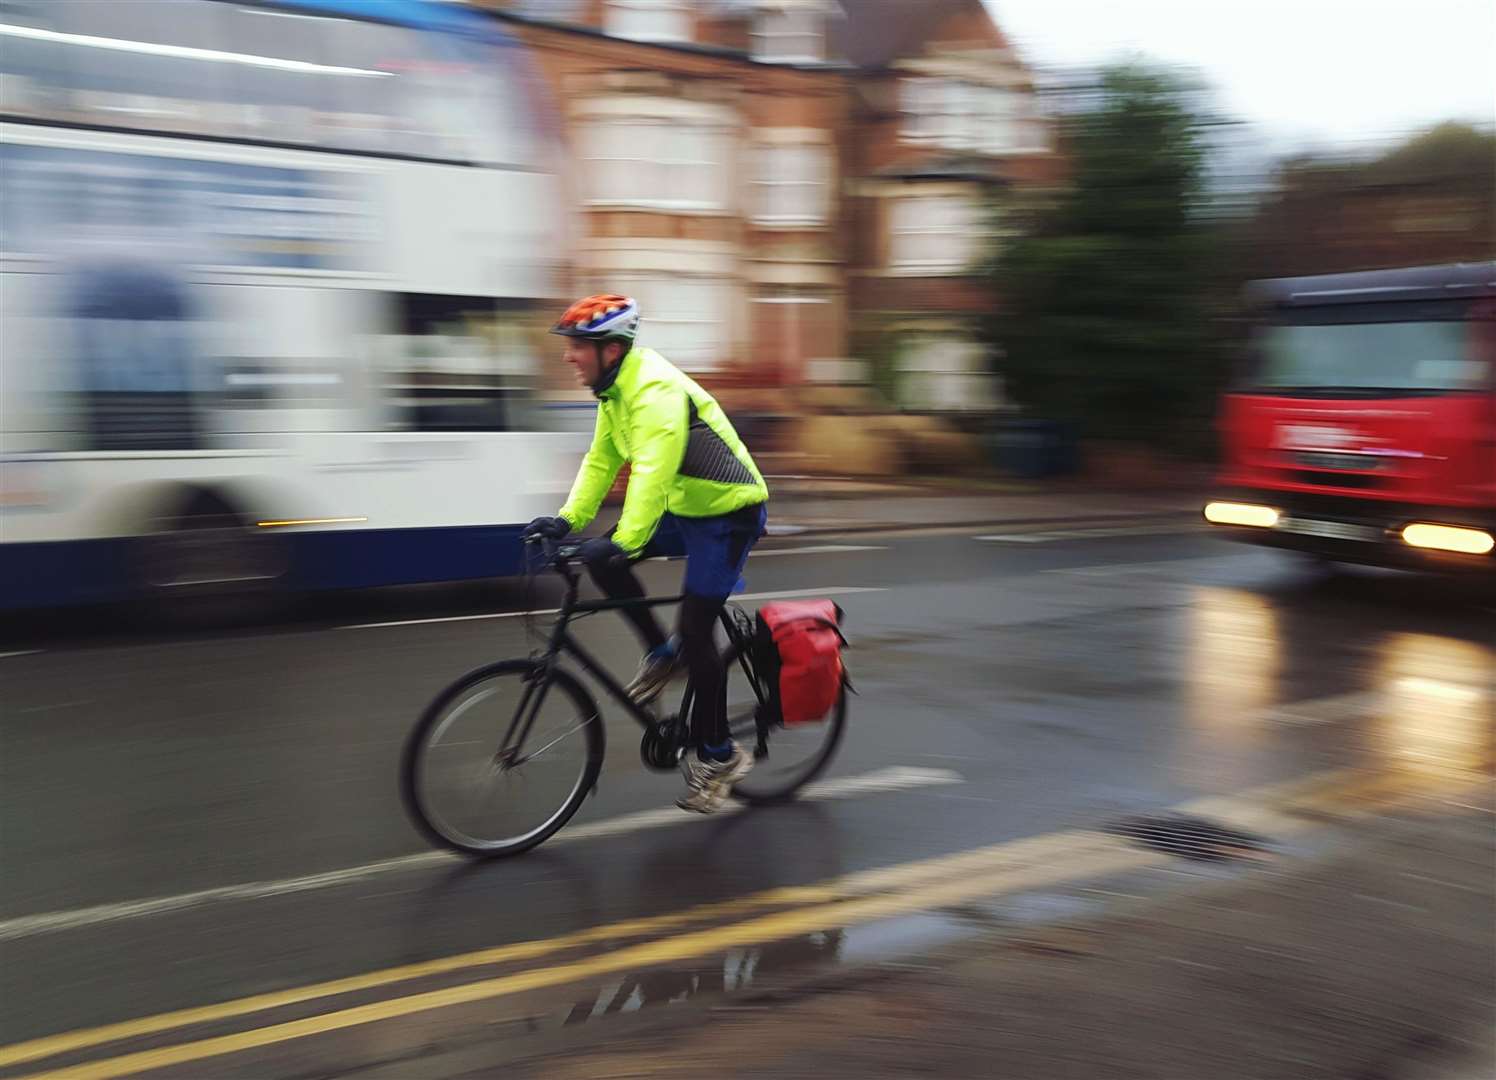 Have cyclists been thought about enough in plans?